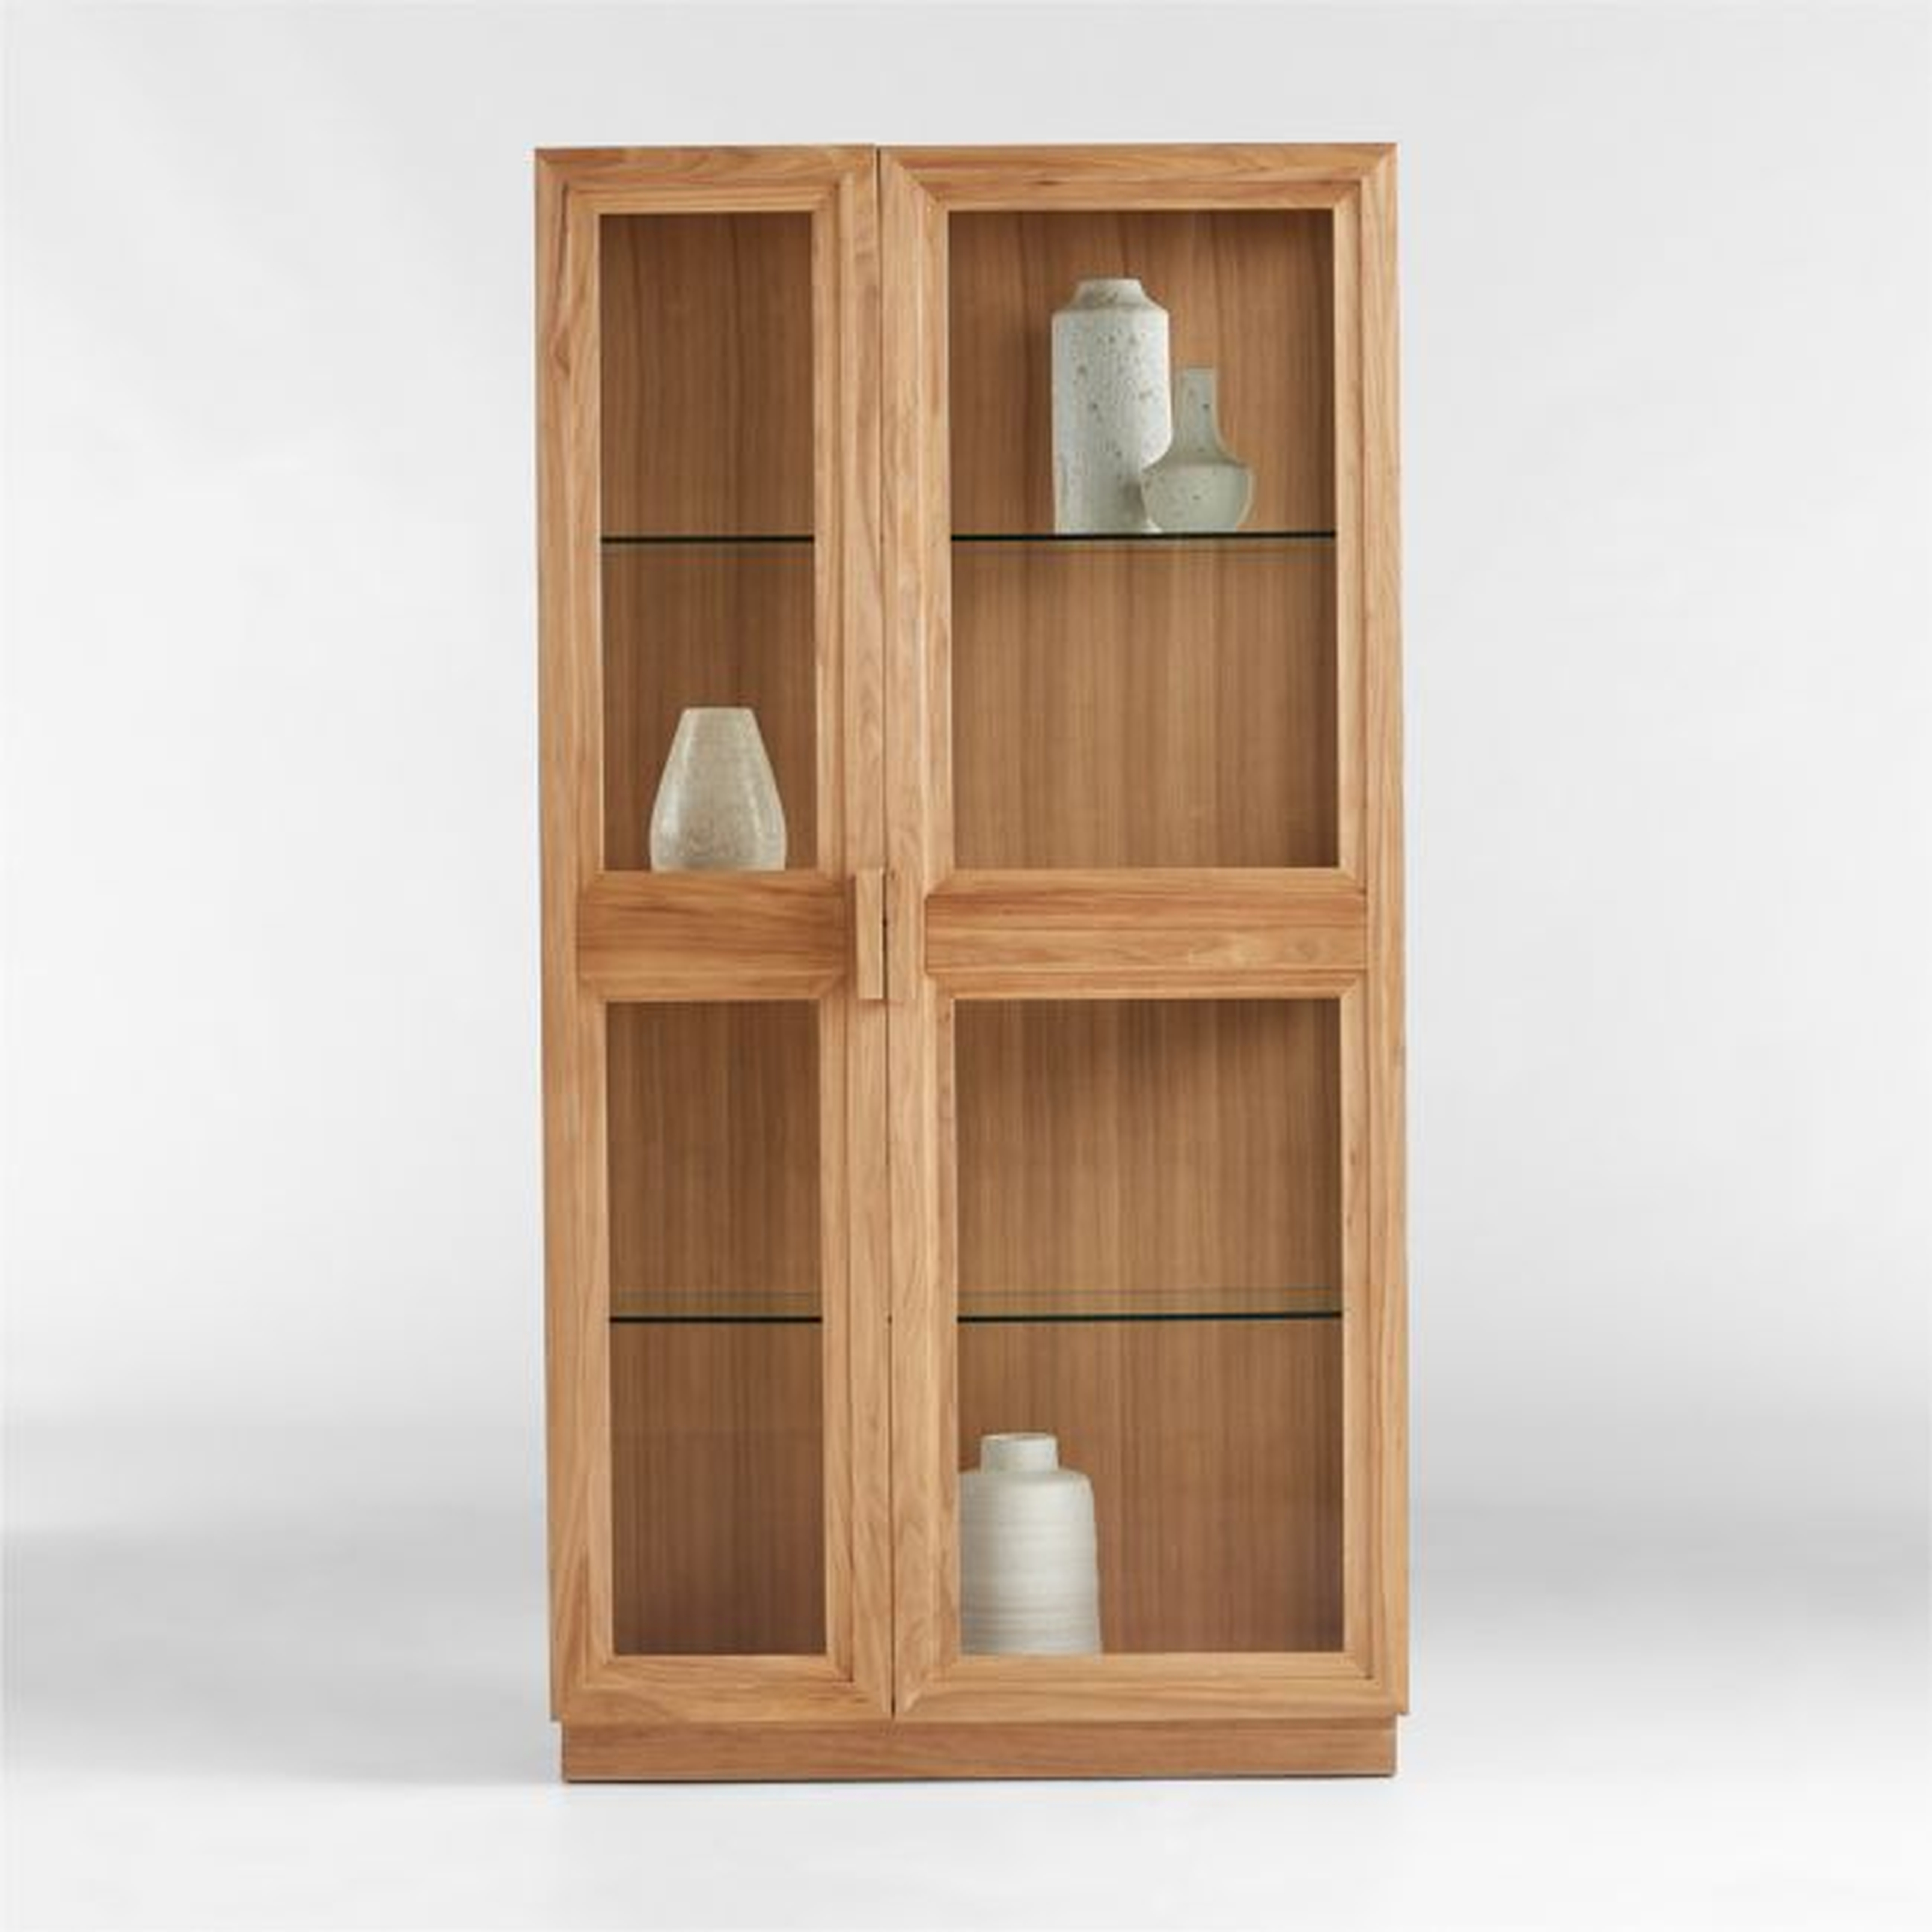 Calypso Glass and Natural Wood Storage Cabinet - Crate and Barrel